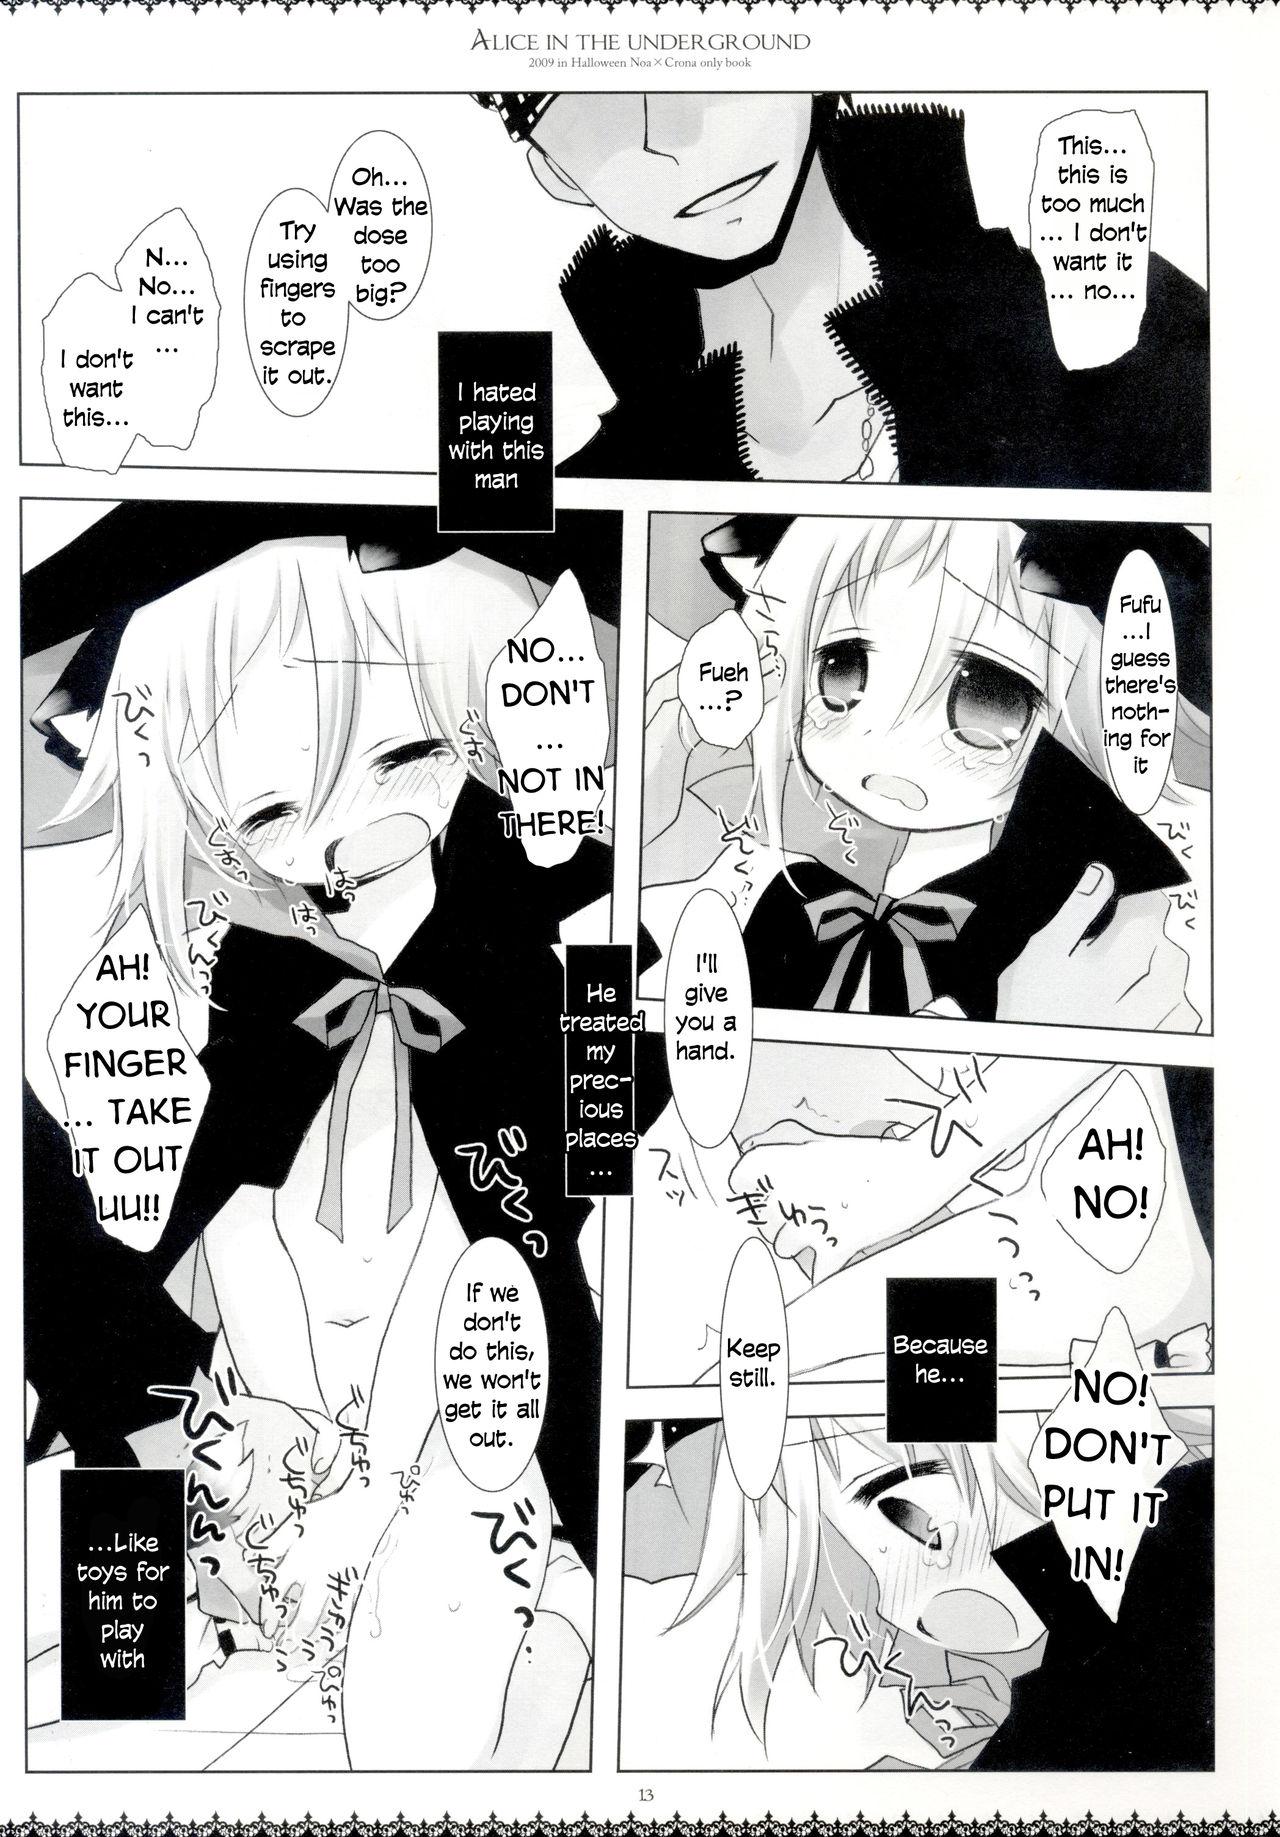 Women Alice in the underground - Soul eater Transsexual - Page 12